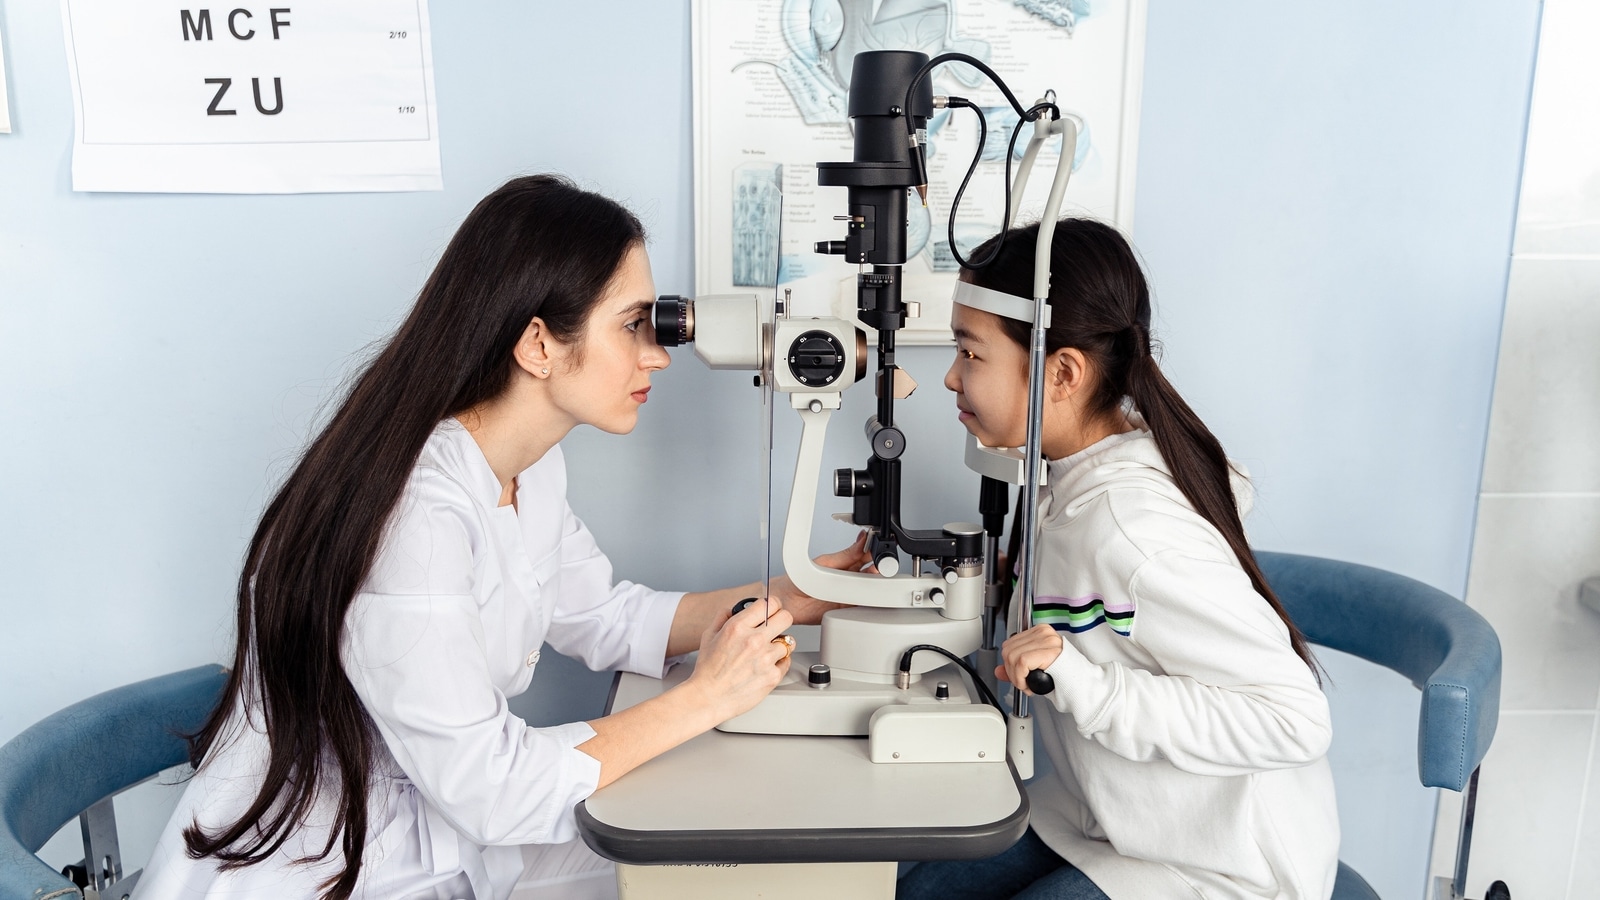 children-s-eyesight-problems-and-their-causes-who-should-have-their-eyes-examined-tips-for-parents